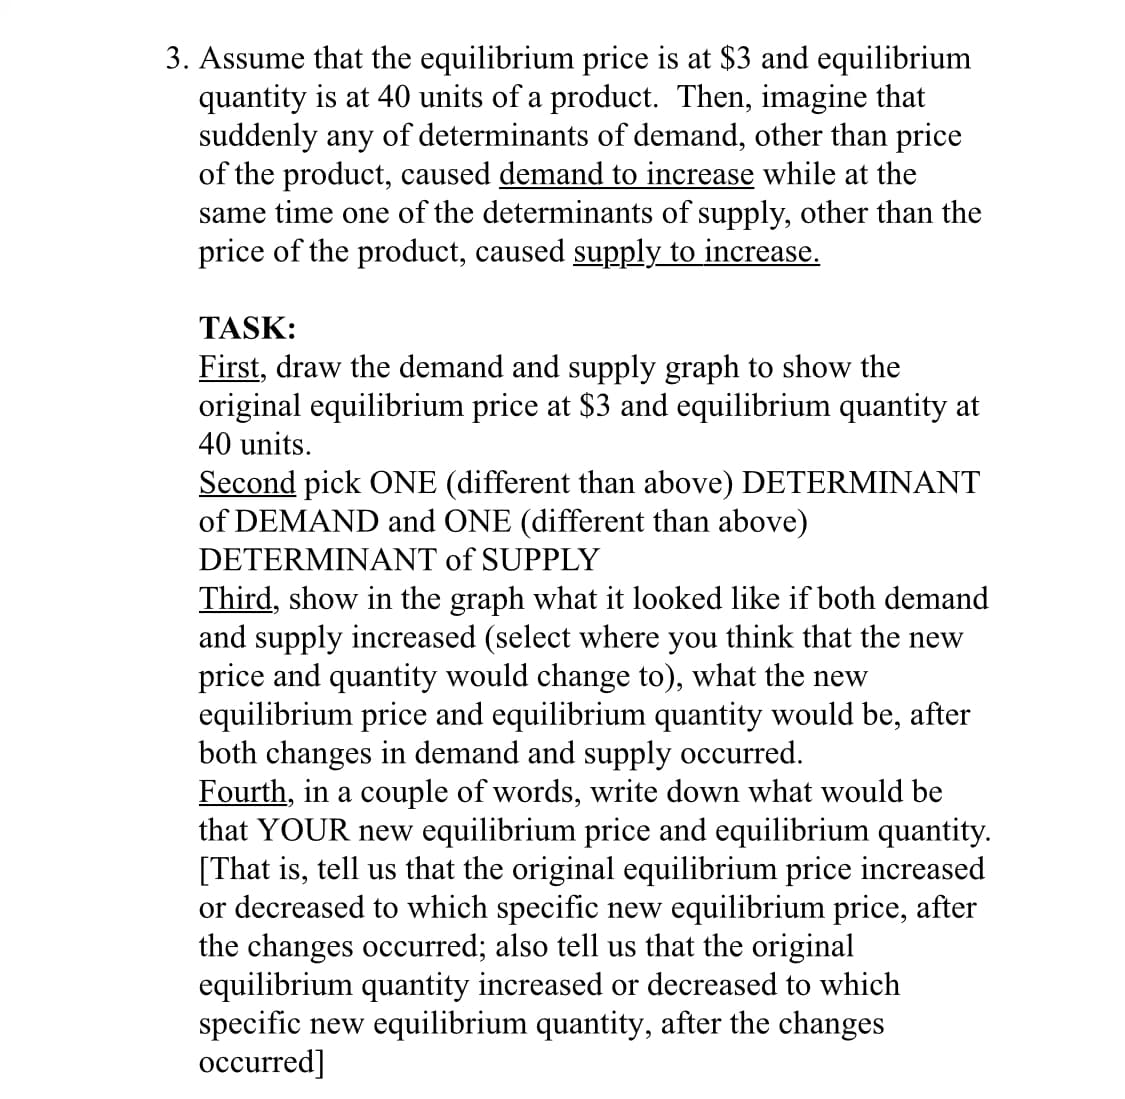 3. Assume that the equilibrium price is at $3 and equilibrium
quantity is at 40 units of a product. Then, imagine that
suddenly any of determinants of demand, other than price
of the product, caused demand to increase while at the
same time one of the determinants of supply, other than the
price of the product, caused supply to increase.
TASK:
First, draw the demand and supply graph to show the
original equilibrium price at $3 and equilibrium quantity at
40 units.
Second pick ONE (different than above) DETERMINANT
of DEMAND and ONE (different than above)
DETERMINANT of SUPPLY
Third, show in the graph what it looked like if both demand
and supply increased (select where you think that the new
price and quantity would change to), what the new
equilibrium price and equilibrium quantity would be, after
both changes in demand and supply occurred.
Fourth, in a couple of words, write down what would be
that YOUR new equilibrium price and equilibrium quantity.
[That is, tell us that the original equilibrium price increased
or decreased to which specific new equilibrium price, after
the changes occurred; also tell us that the original
equilibrium quantity increased or decreased to which
specific new equilibrium quantity, after the changes
occurred]
